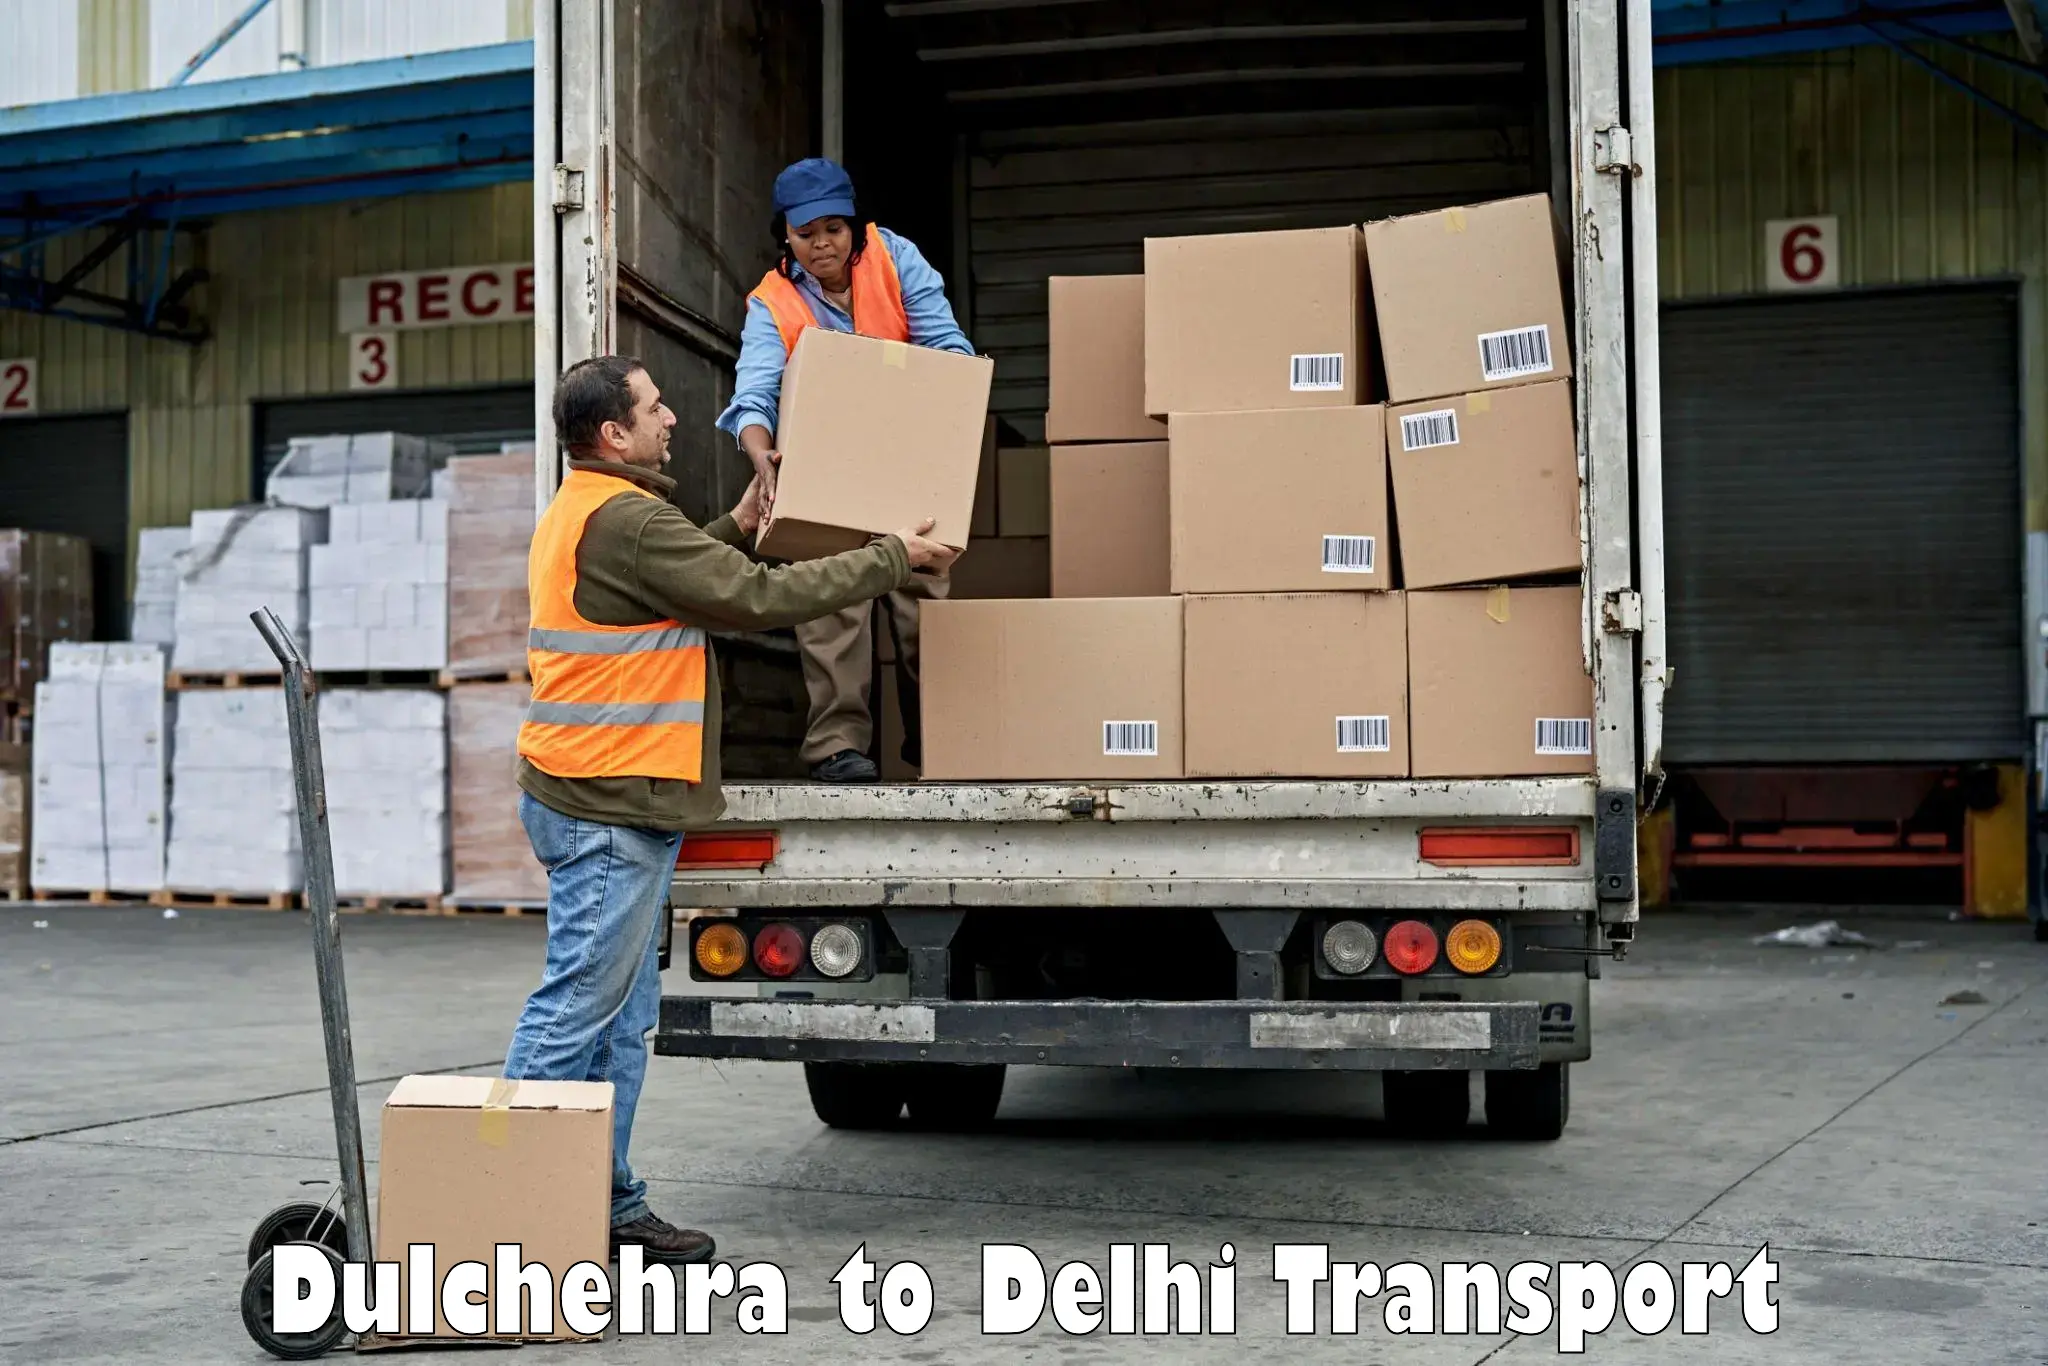 Luggage transport services Dulchehra to NCR